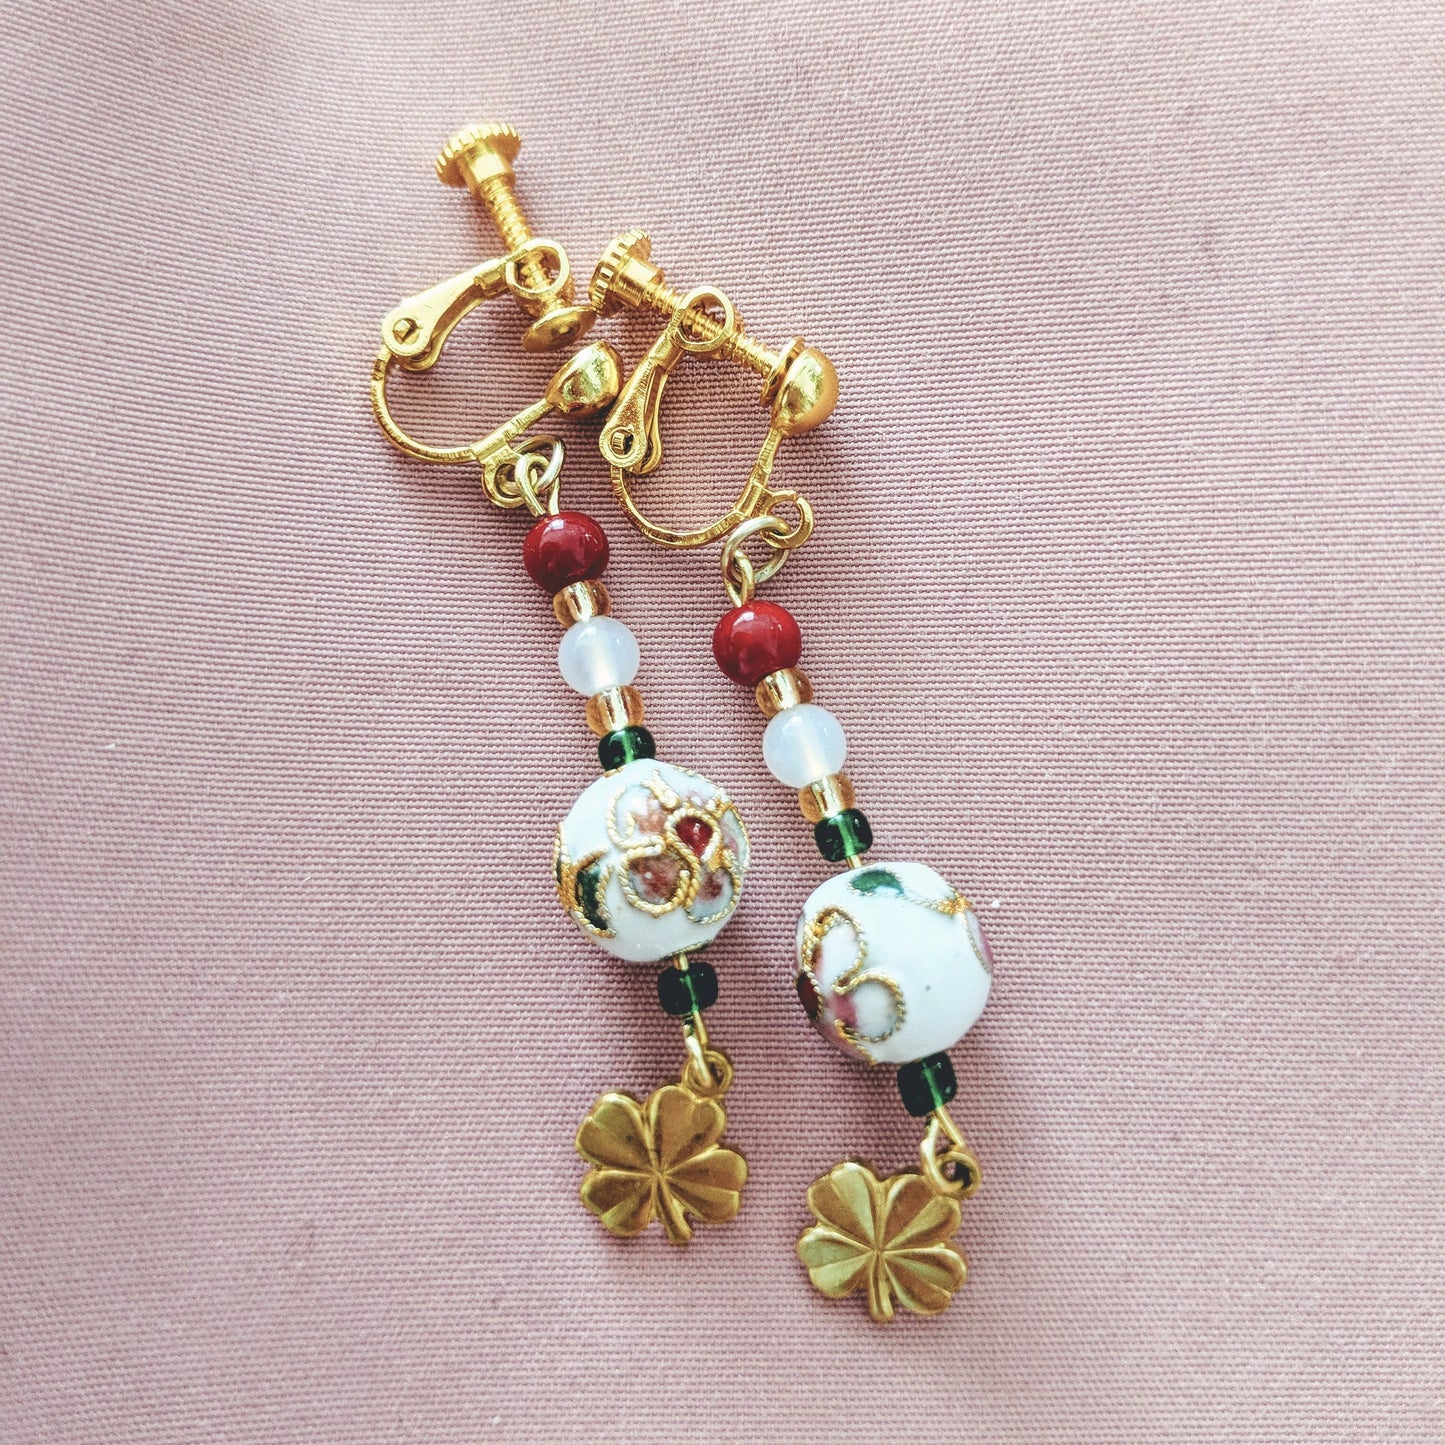 Chinese Vintage Inspired Cloisonné Bead Earring